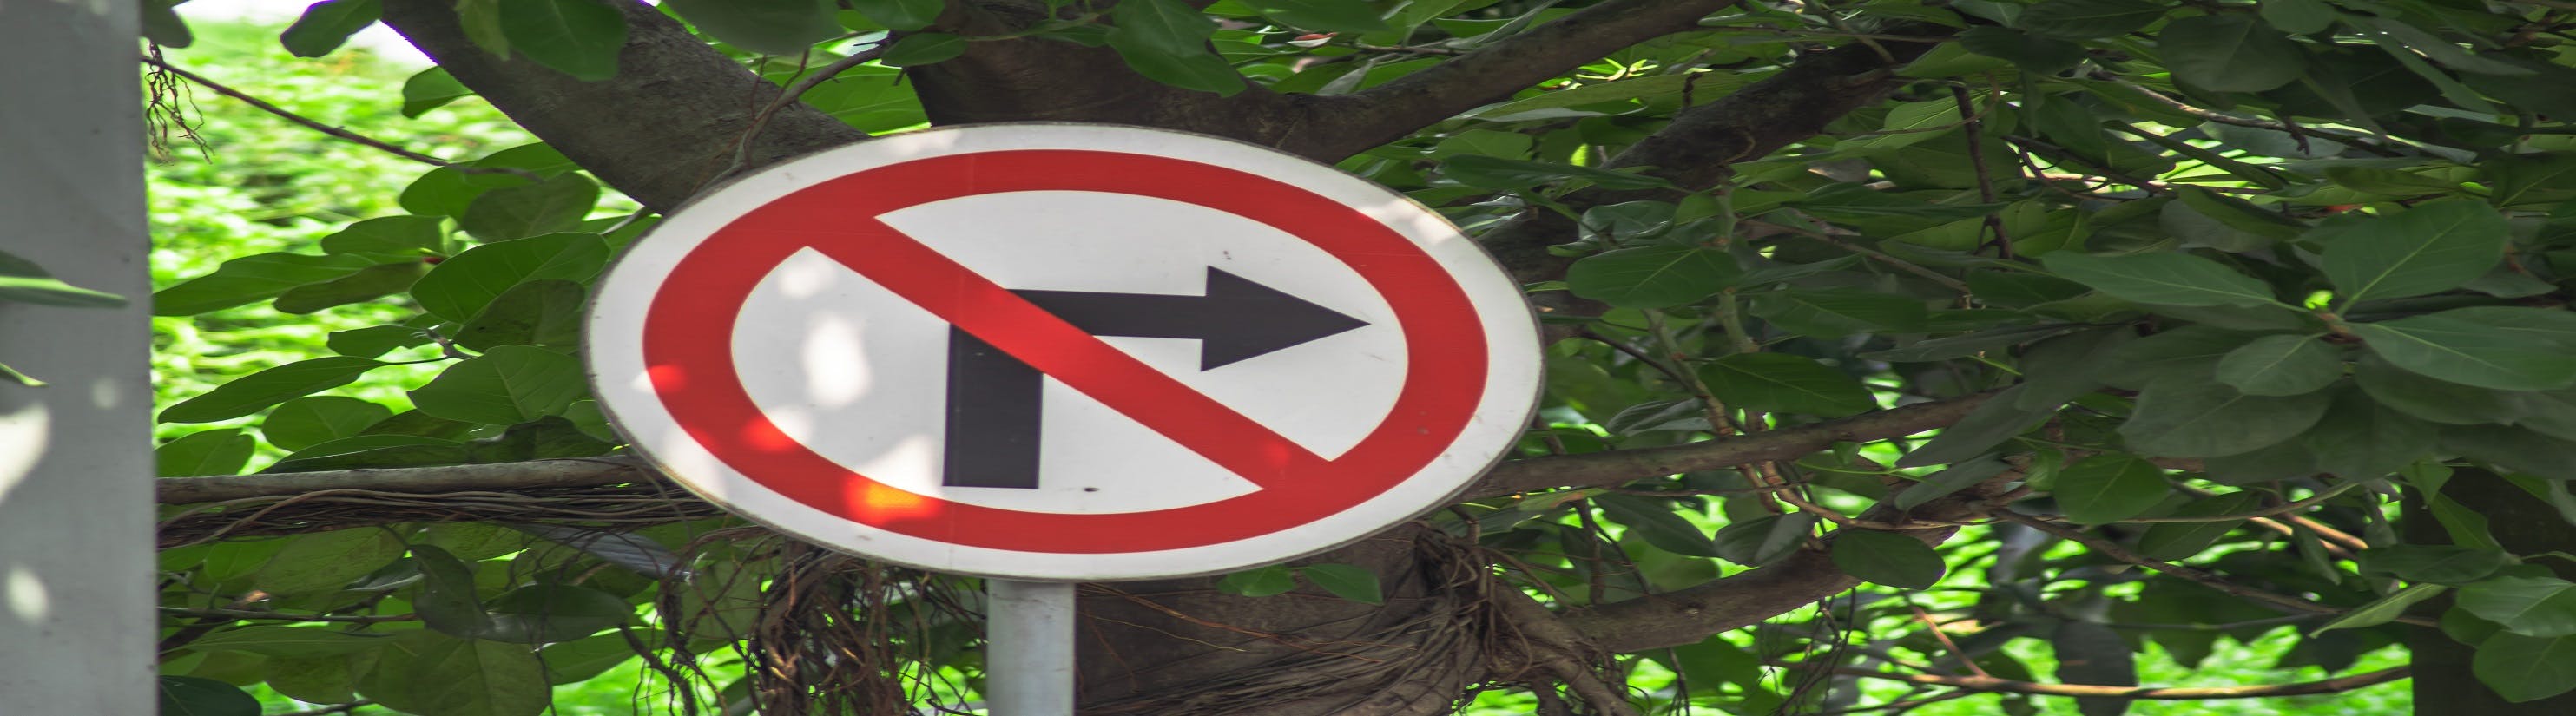 Photo of No Right Turn road sign